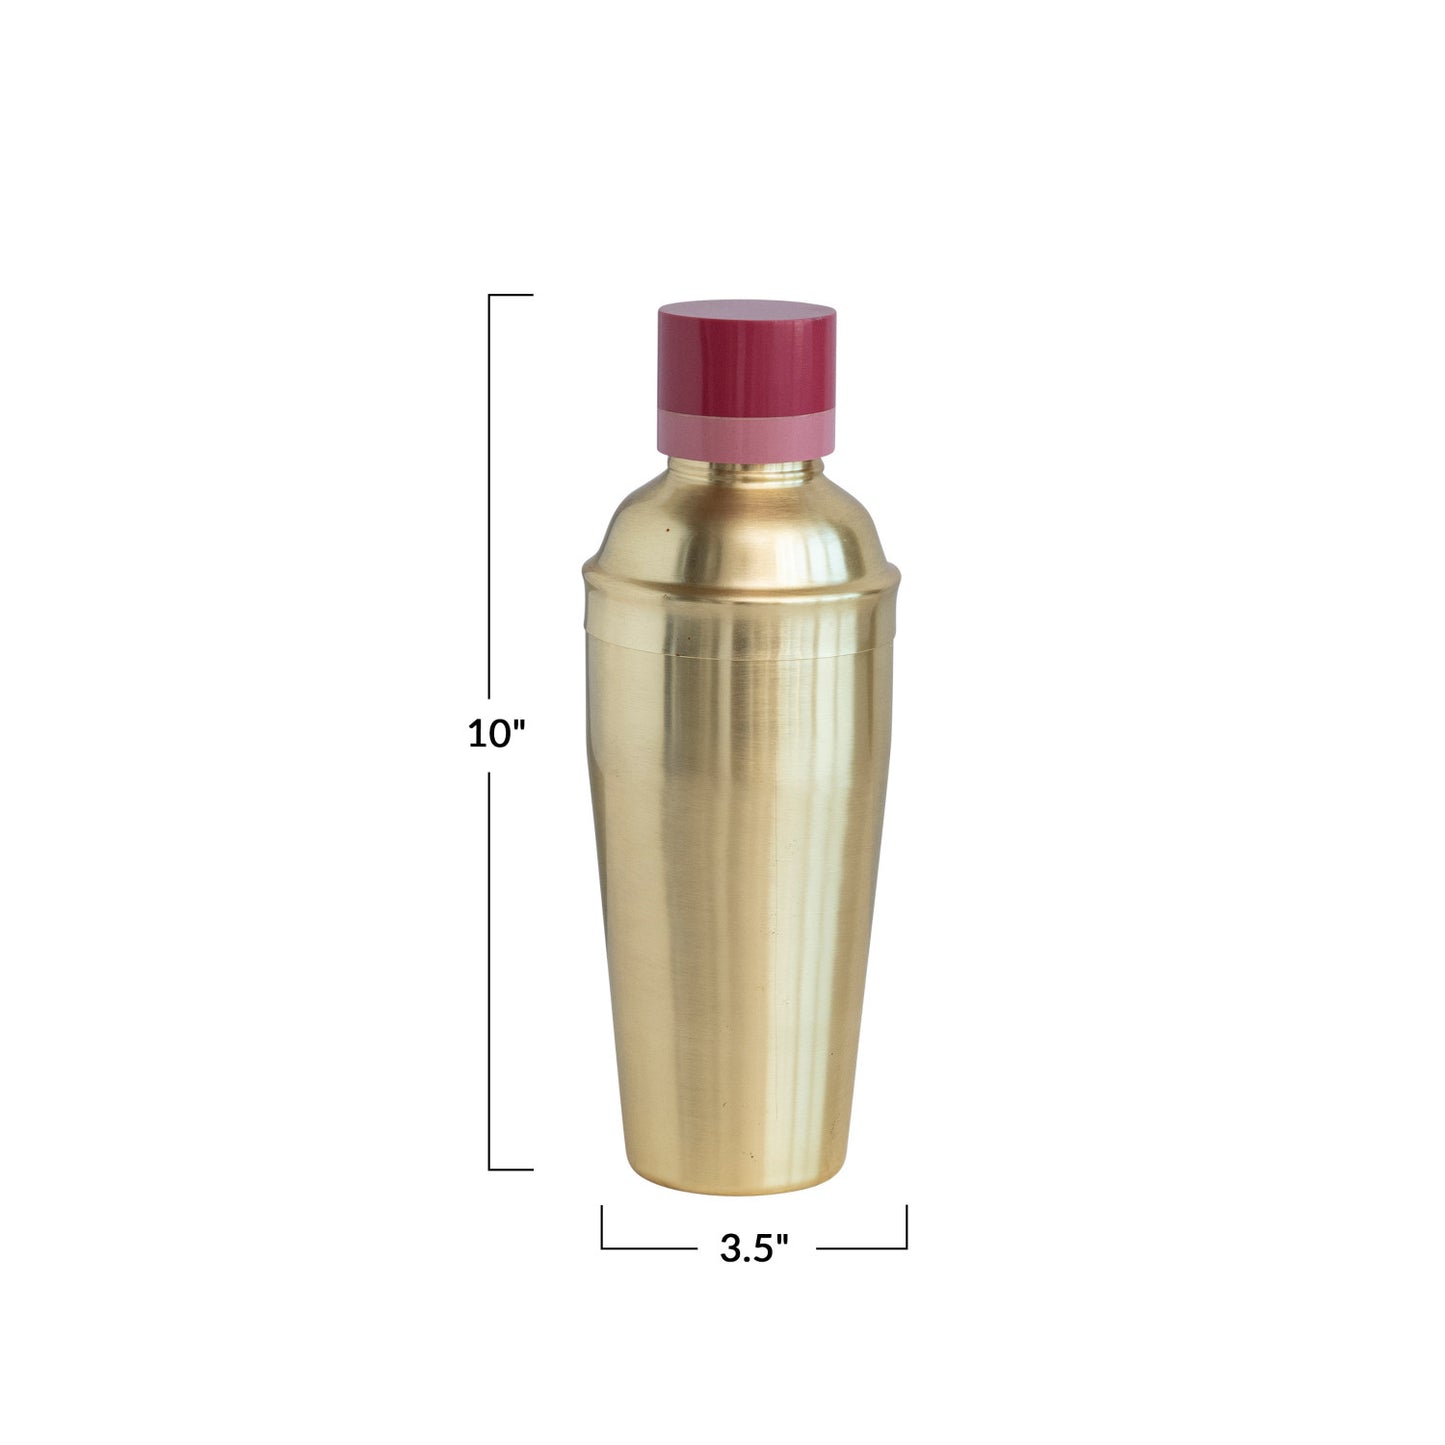 Cocktail Shaker w/ Resin Top, Brass Finish and Pink